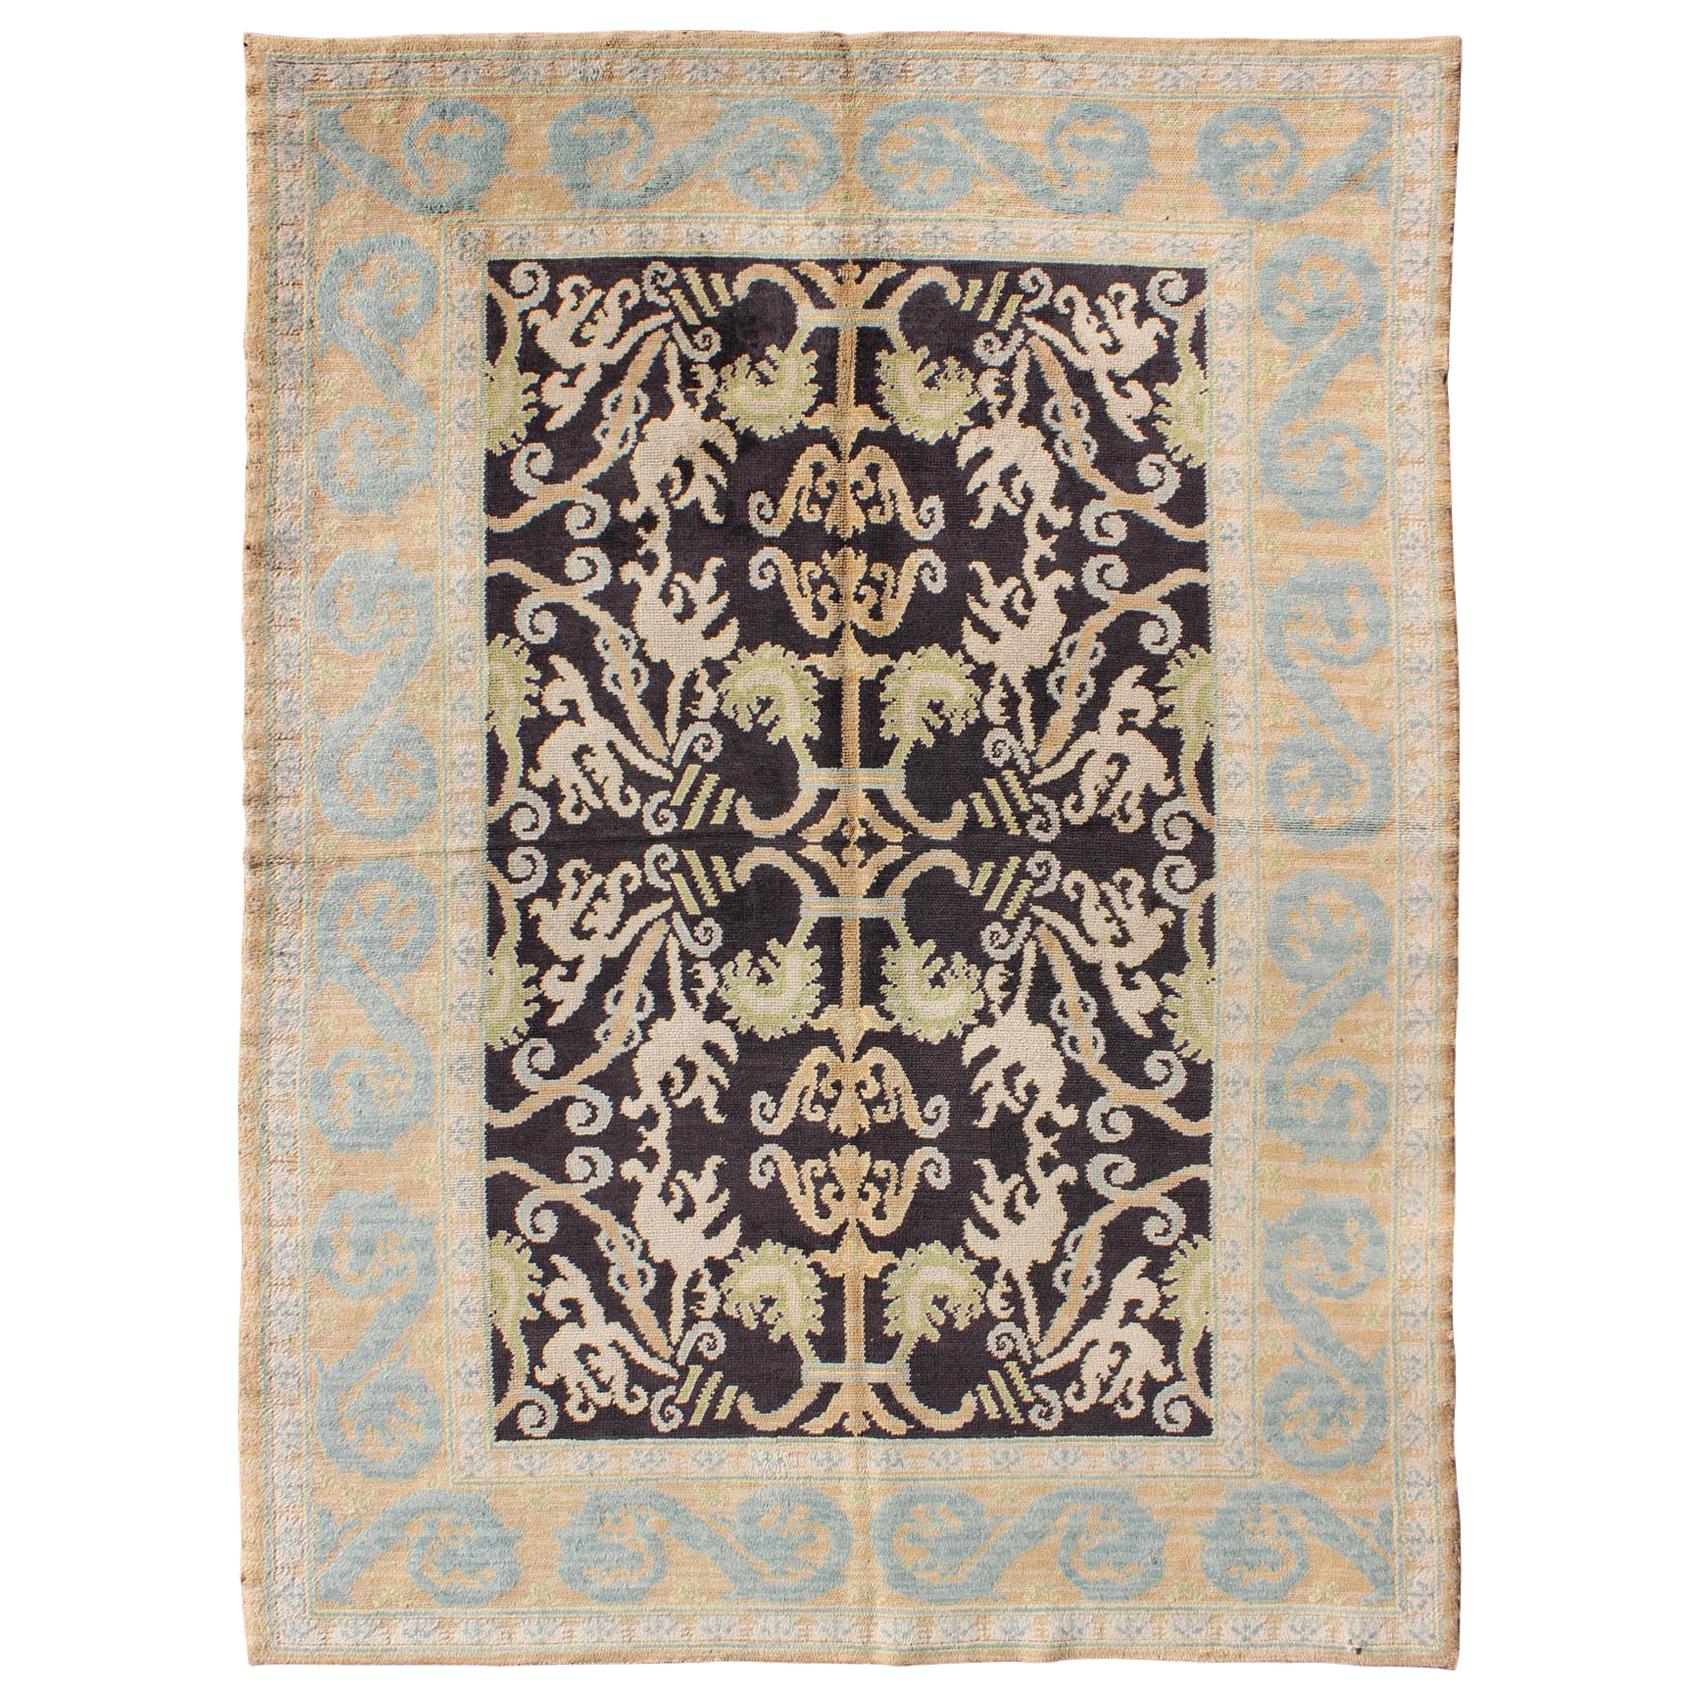 Antique Spanish Rug with All-Over Botanicals in Black, Light Blue, Light Green For Sale